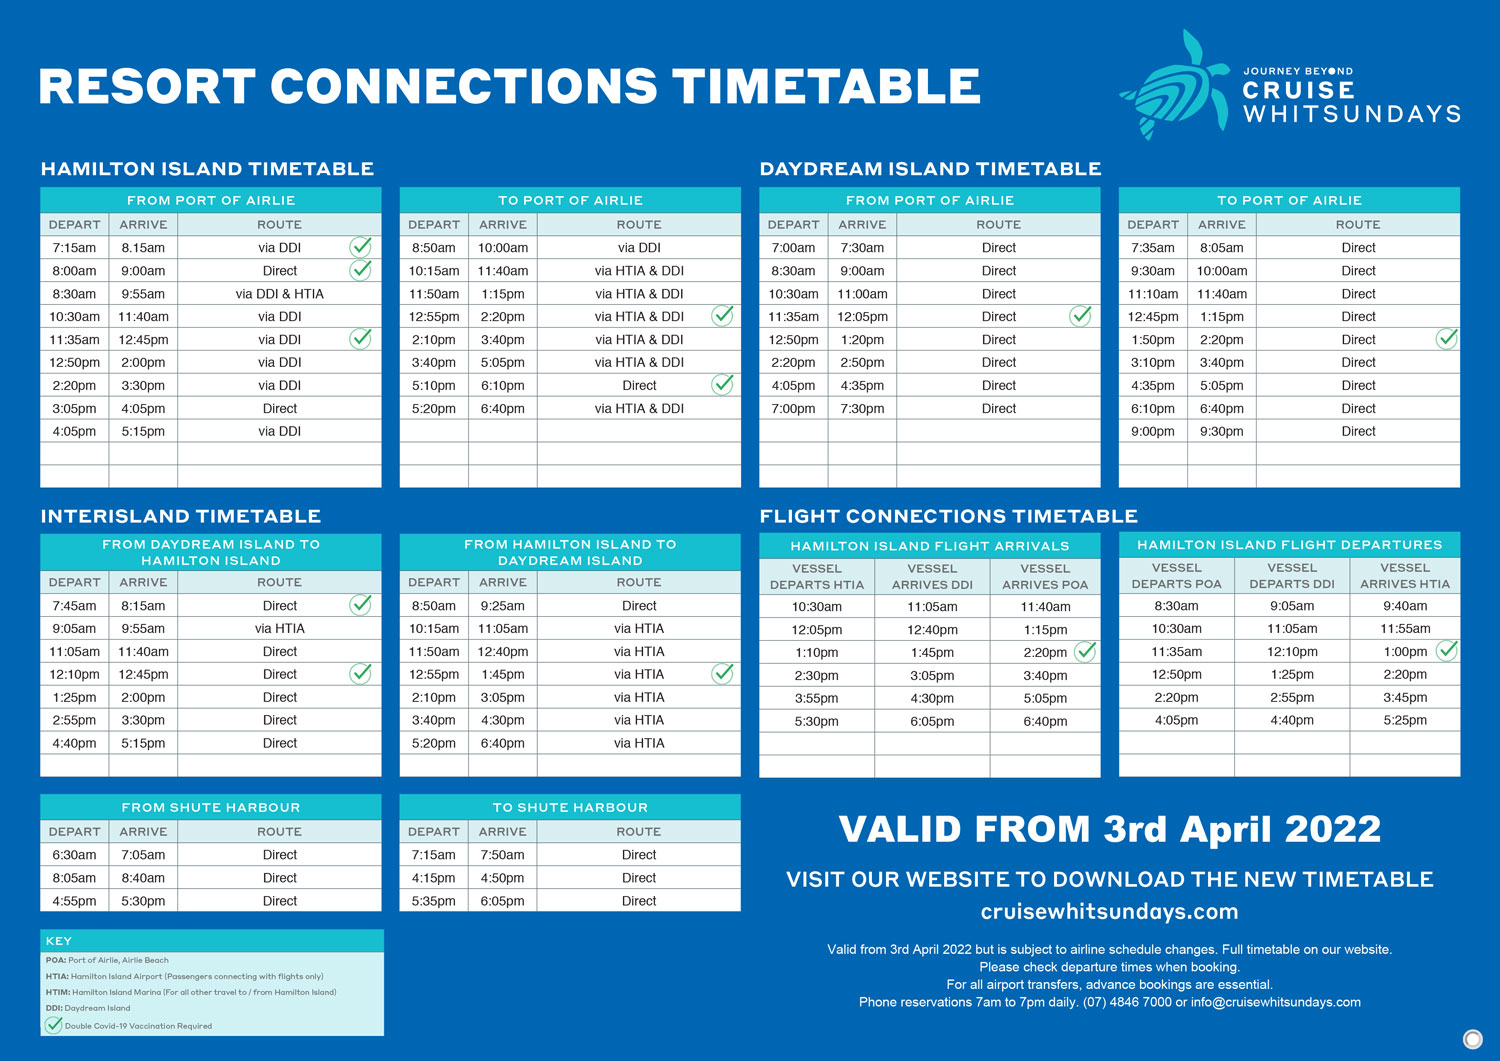 NEW RESORT CONNECTIONS TIMETABLE